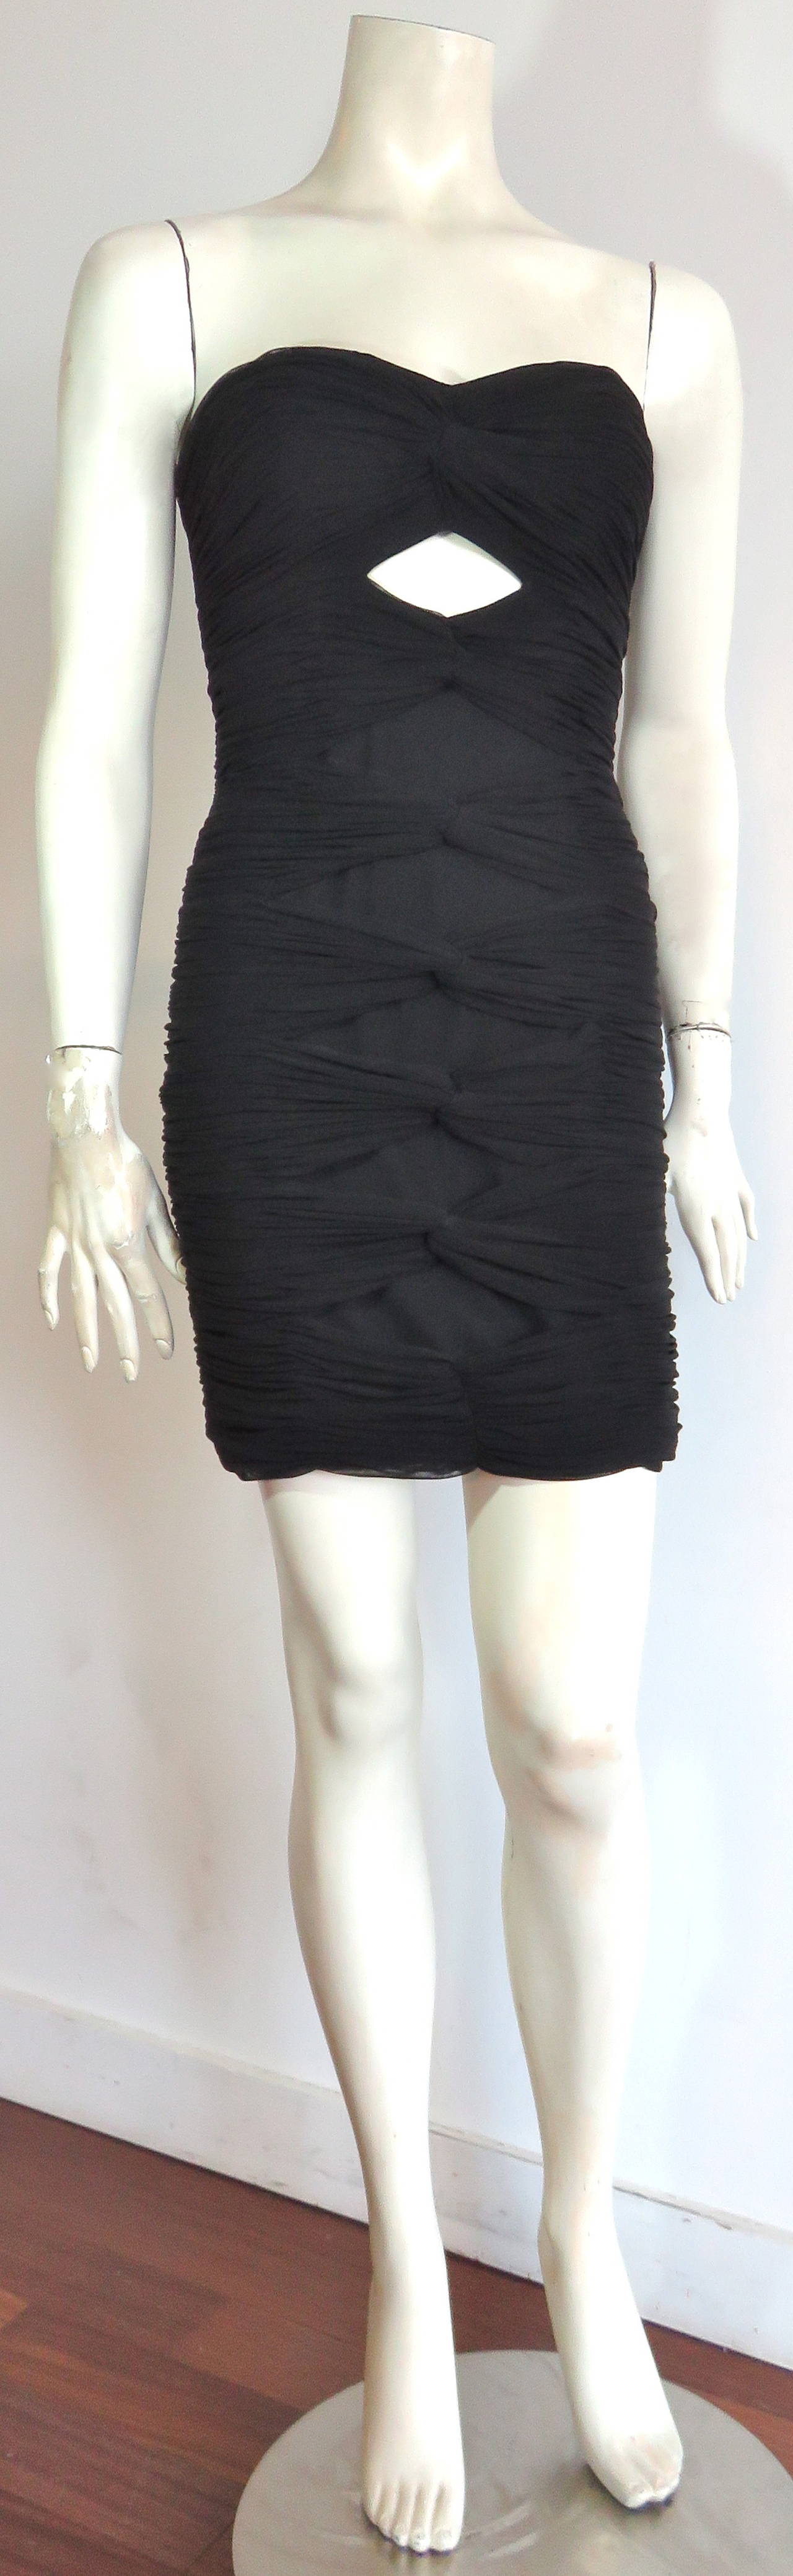 VICKY TIEL Ruché cut-out dress - New For Sale 2